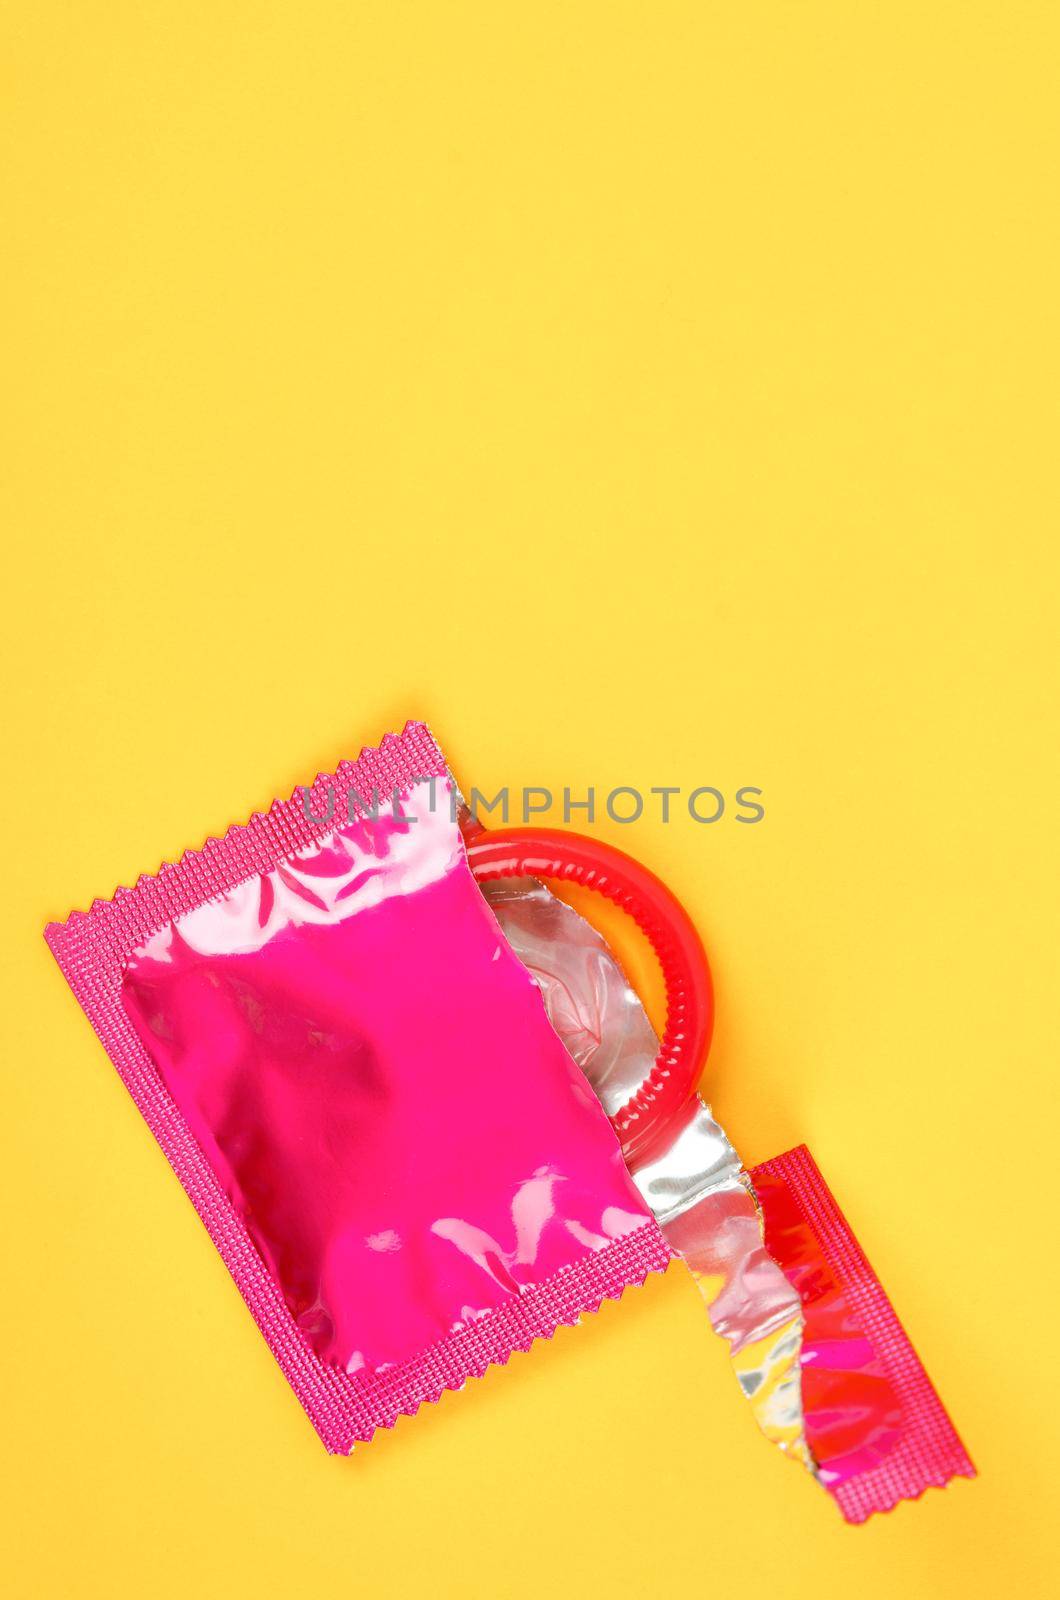 The Pink opened condom and condom in pack on a yellow background.